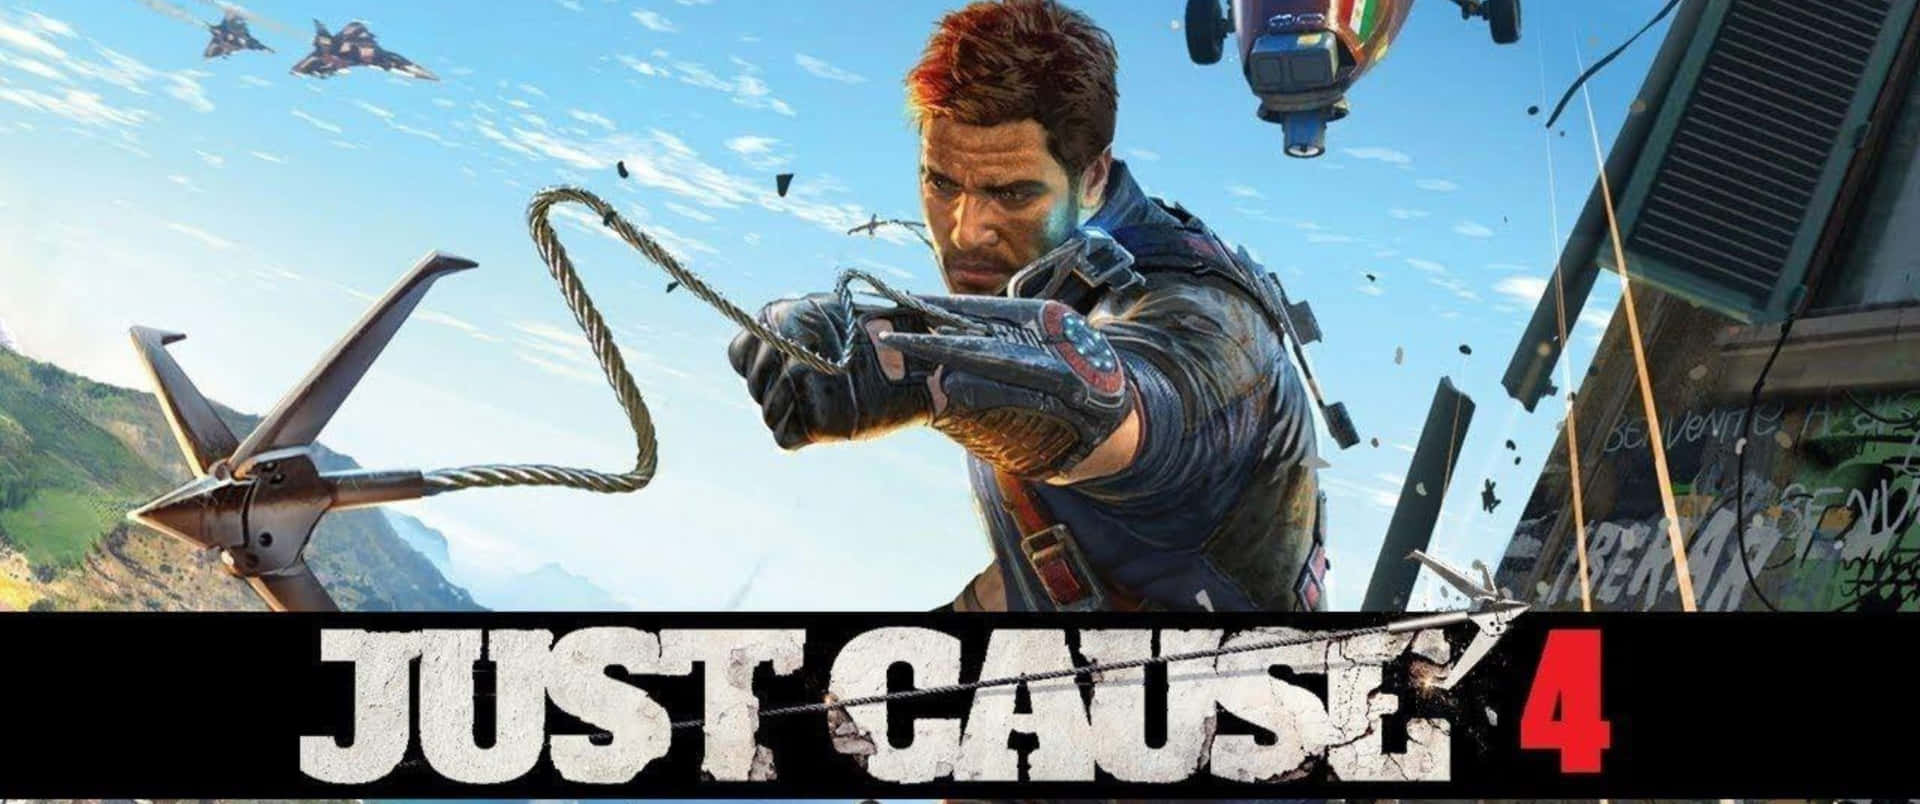 3440x1440p Just Cause 4 Background Wallpaper